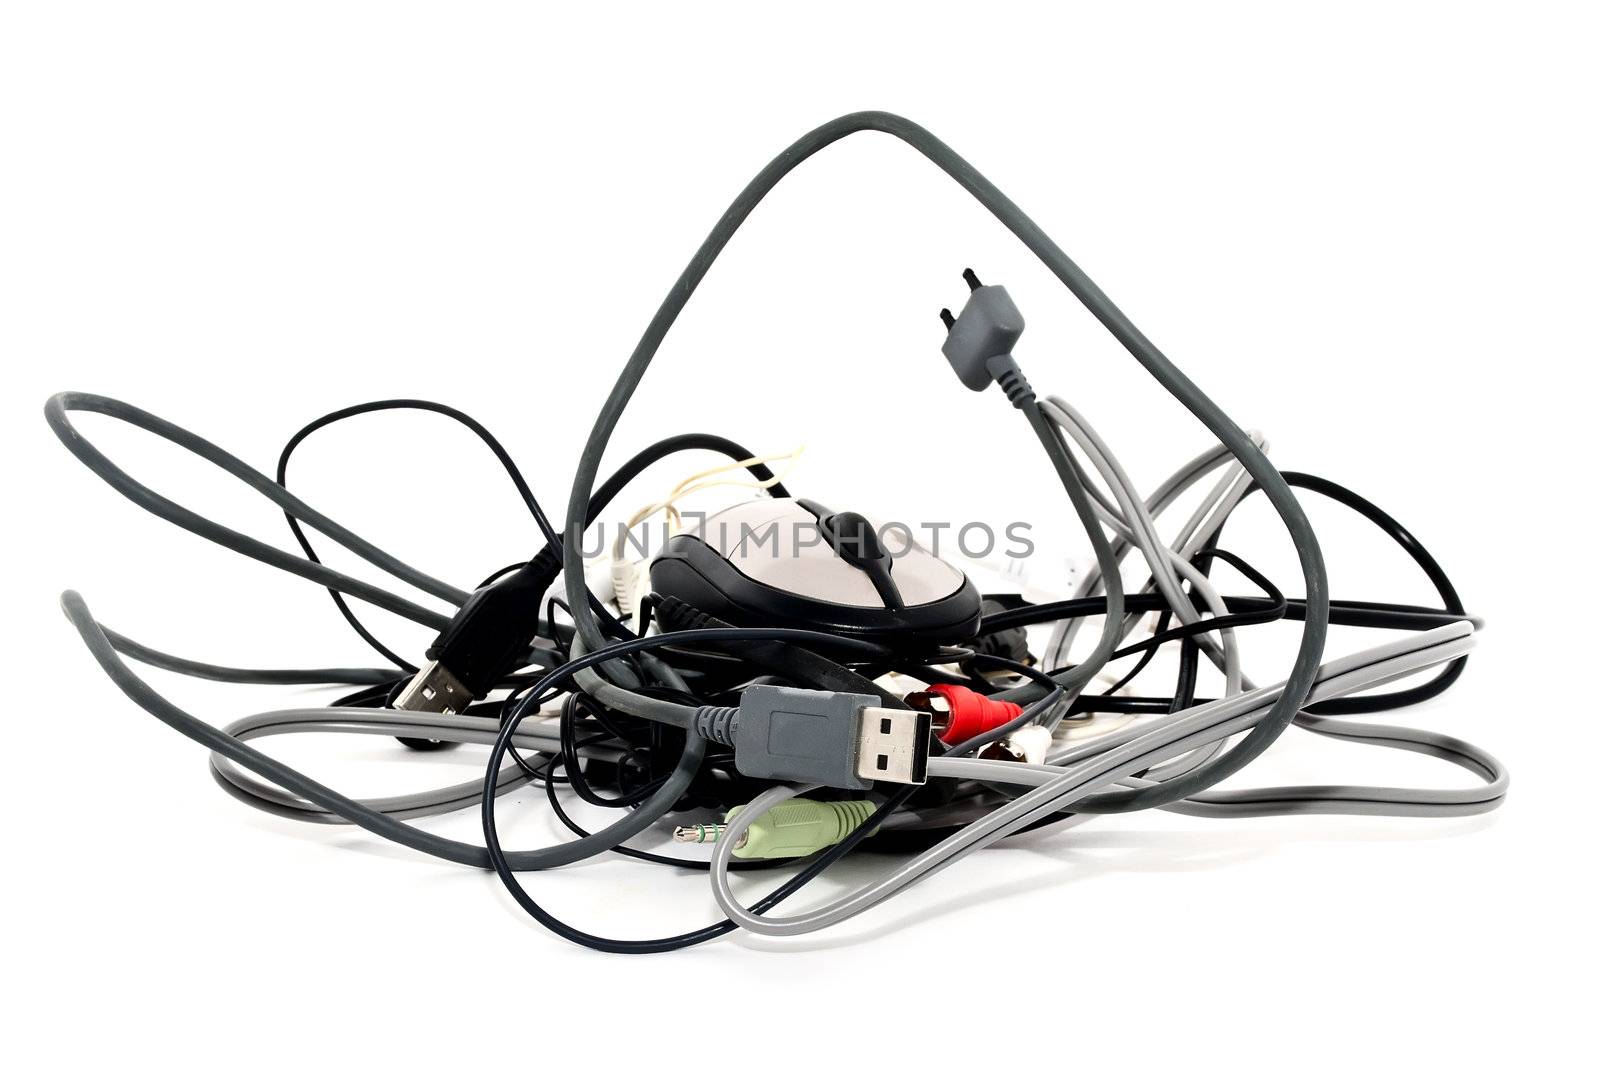 Heap of twisted wires and a mouse by Diversphoto